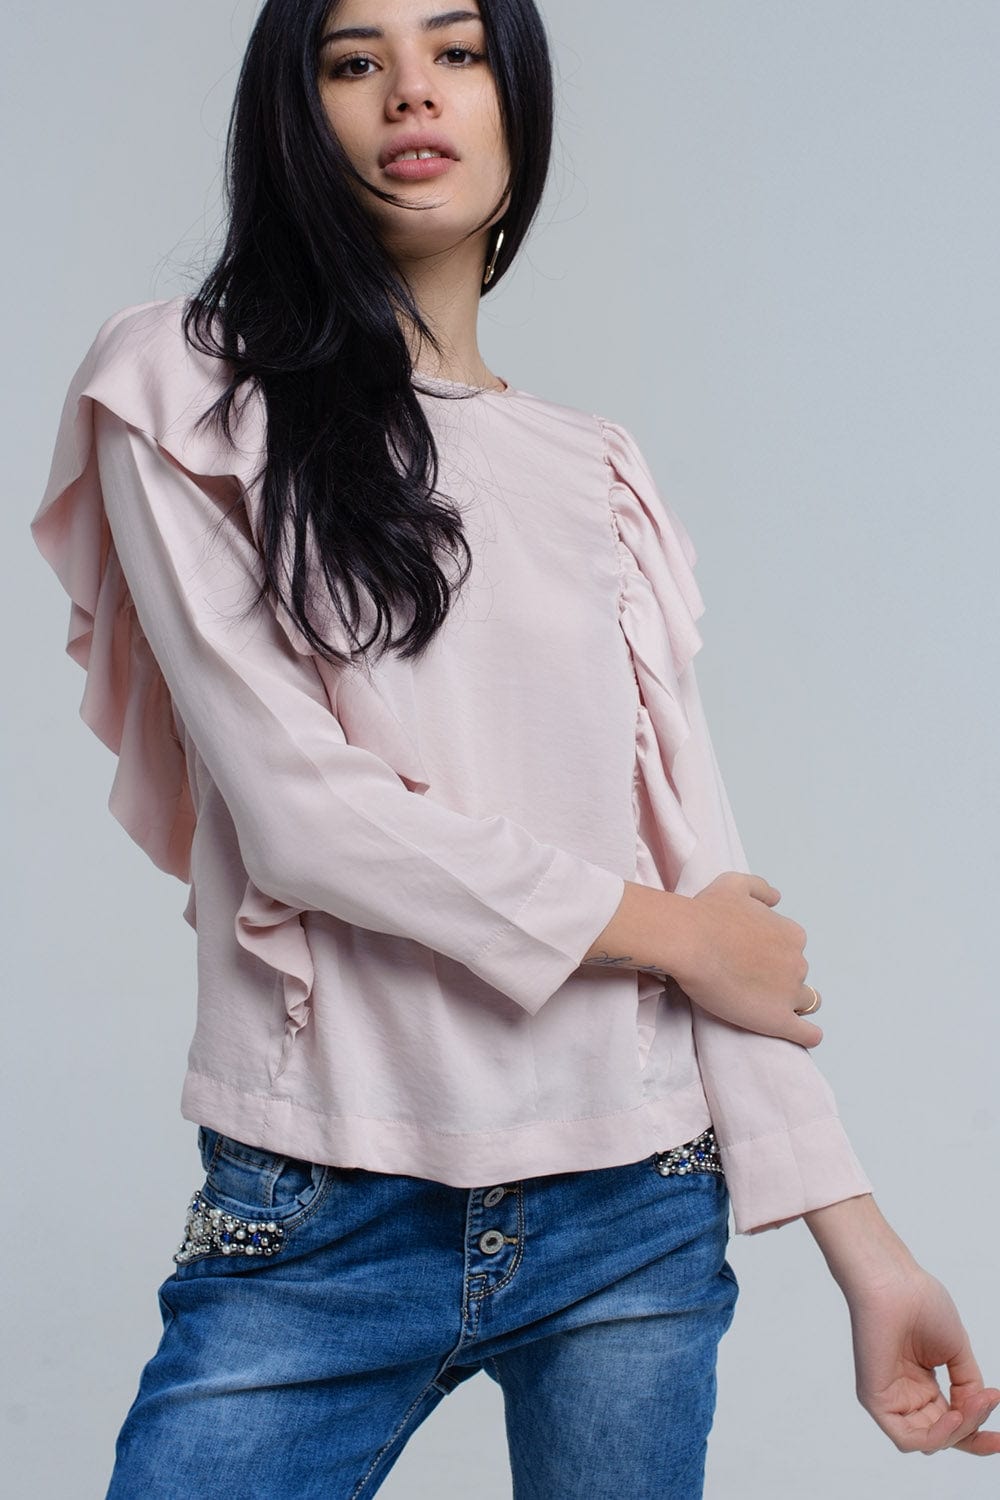 Q2 Women's Blouse Top with ruffle detail in pale pink